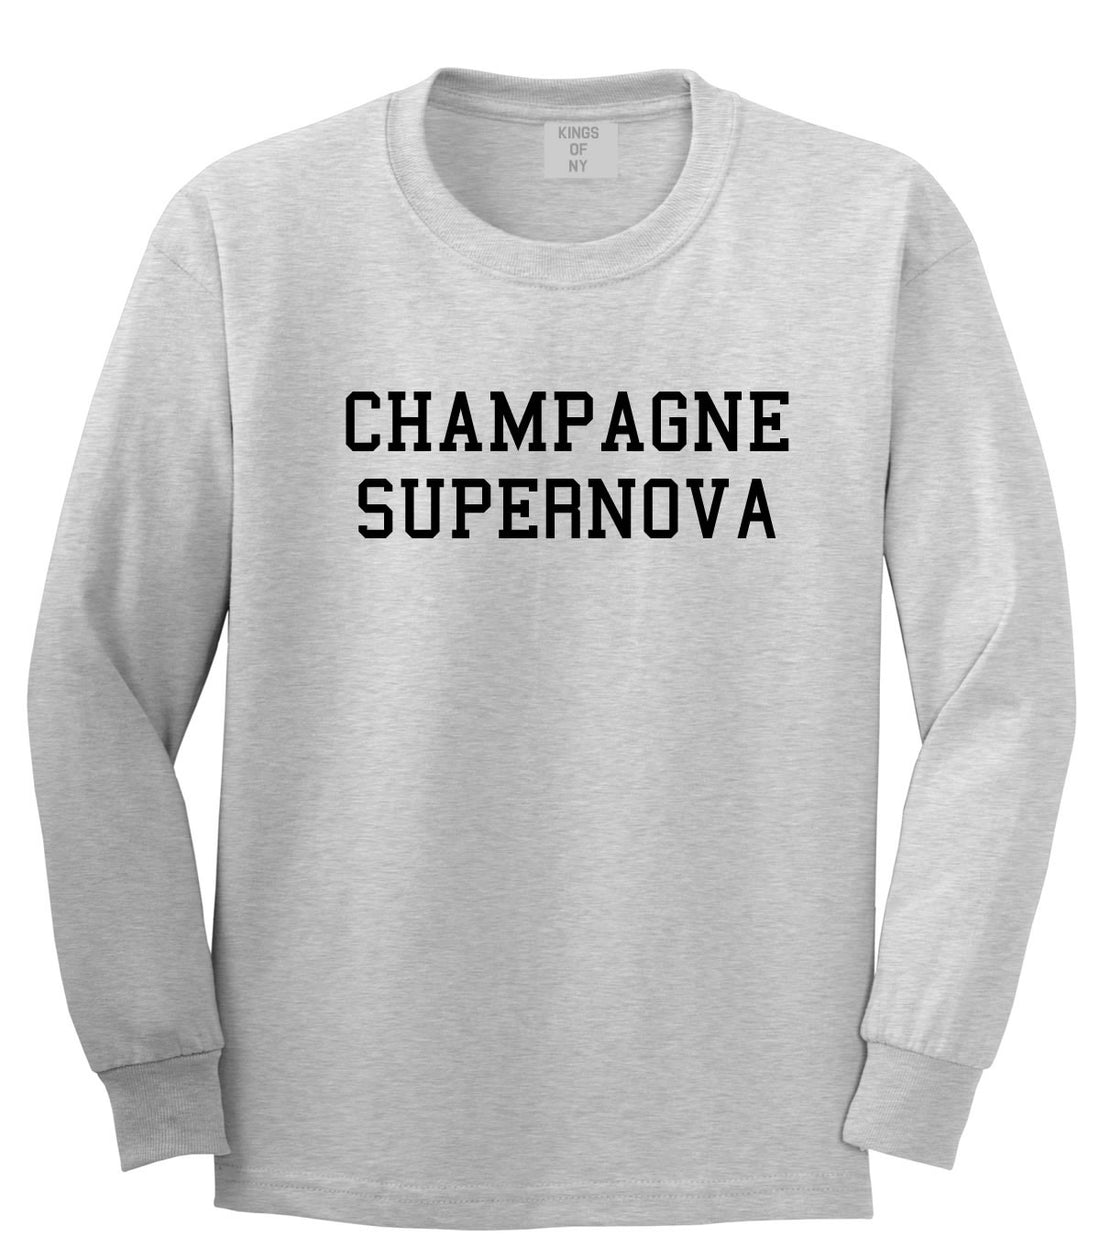 Champagne Supernova Long Sleeve T-Shirt in Grey by Kings Of NY